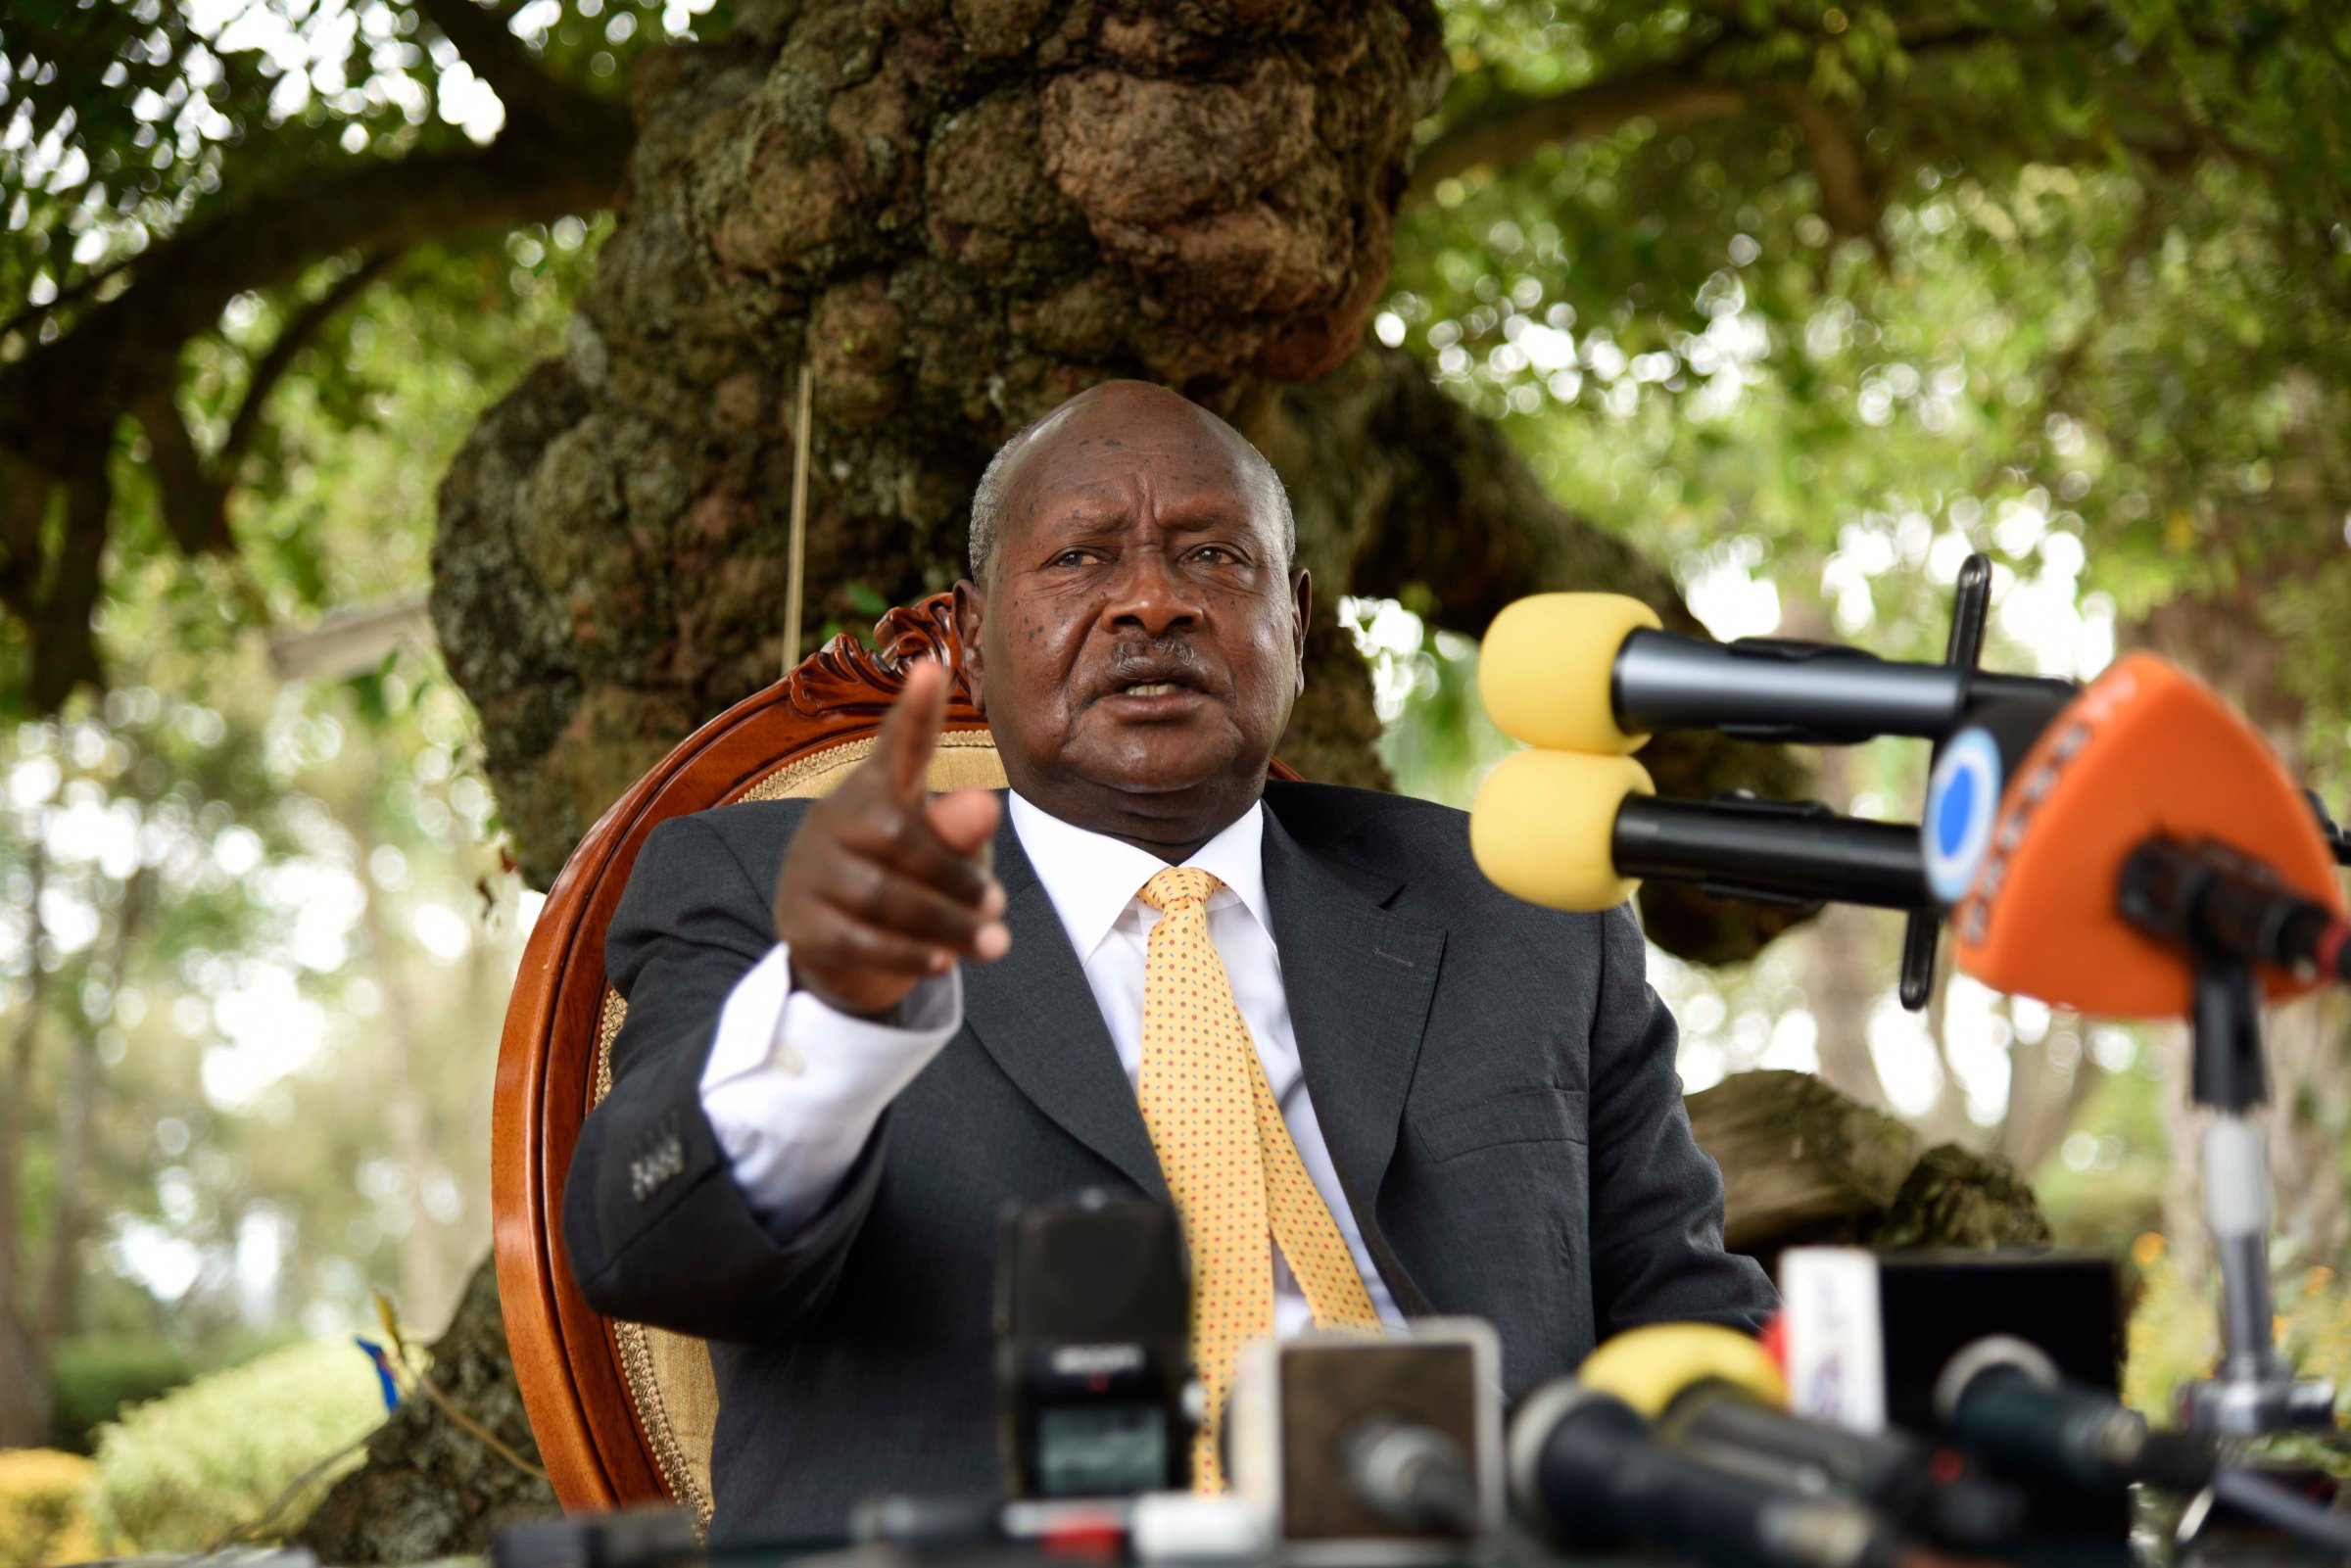 Newly re-elected president Yoweri Museveni, in power since three decades, gestures as he speaks during a press conference at his country house in Rwakitura on Feb. 21, 2016.